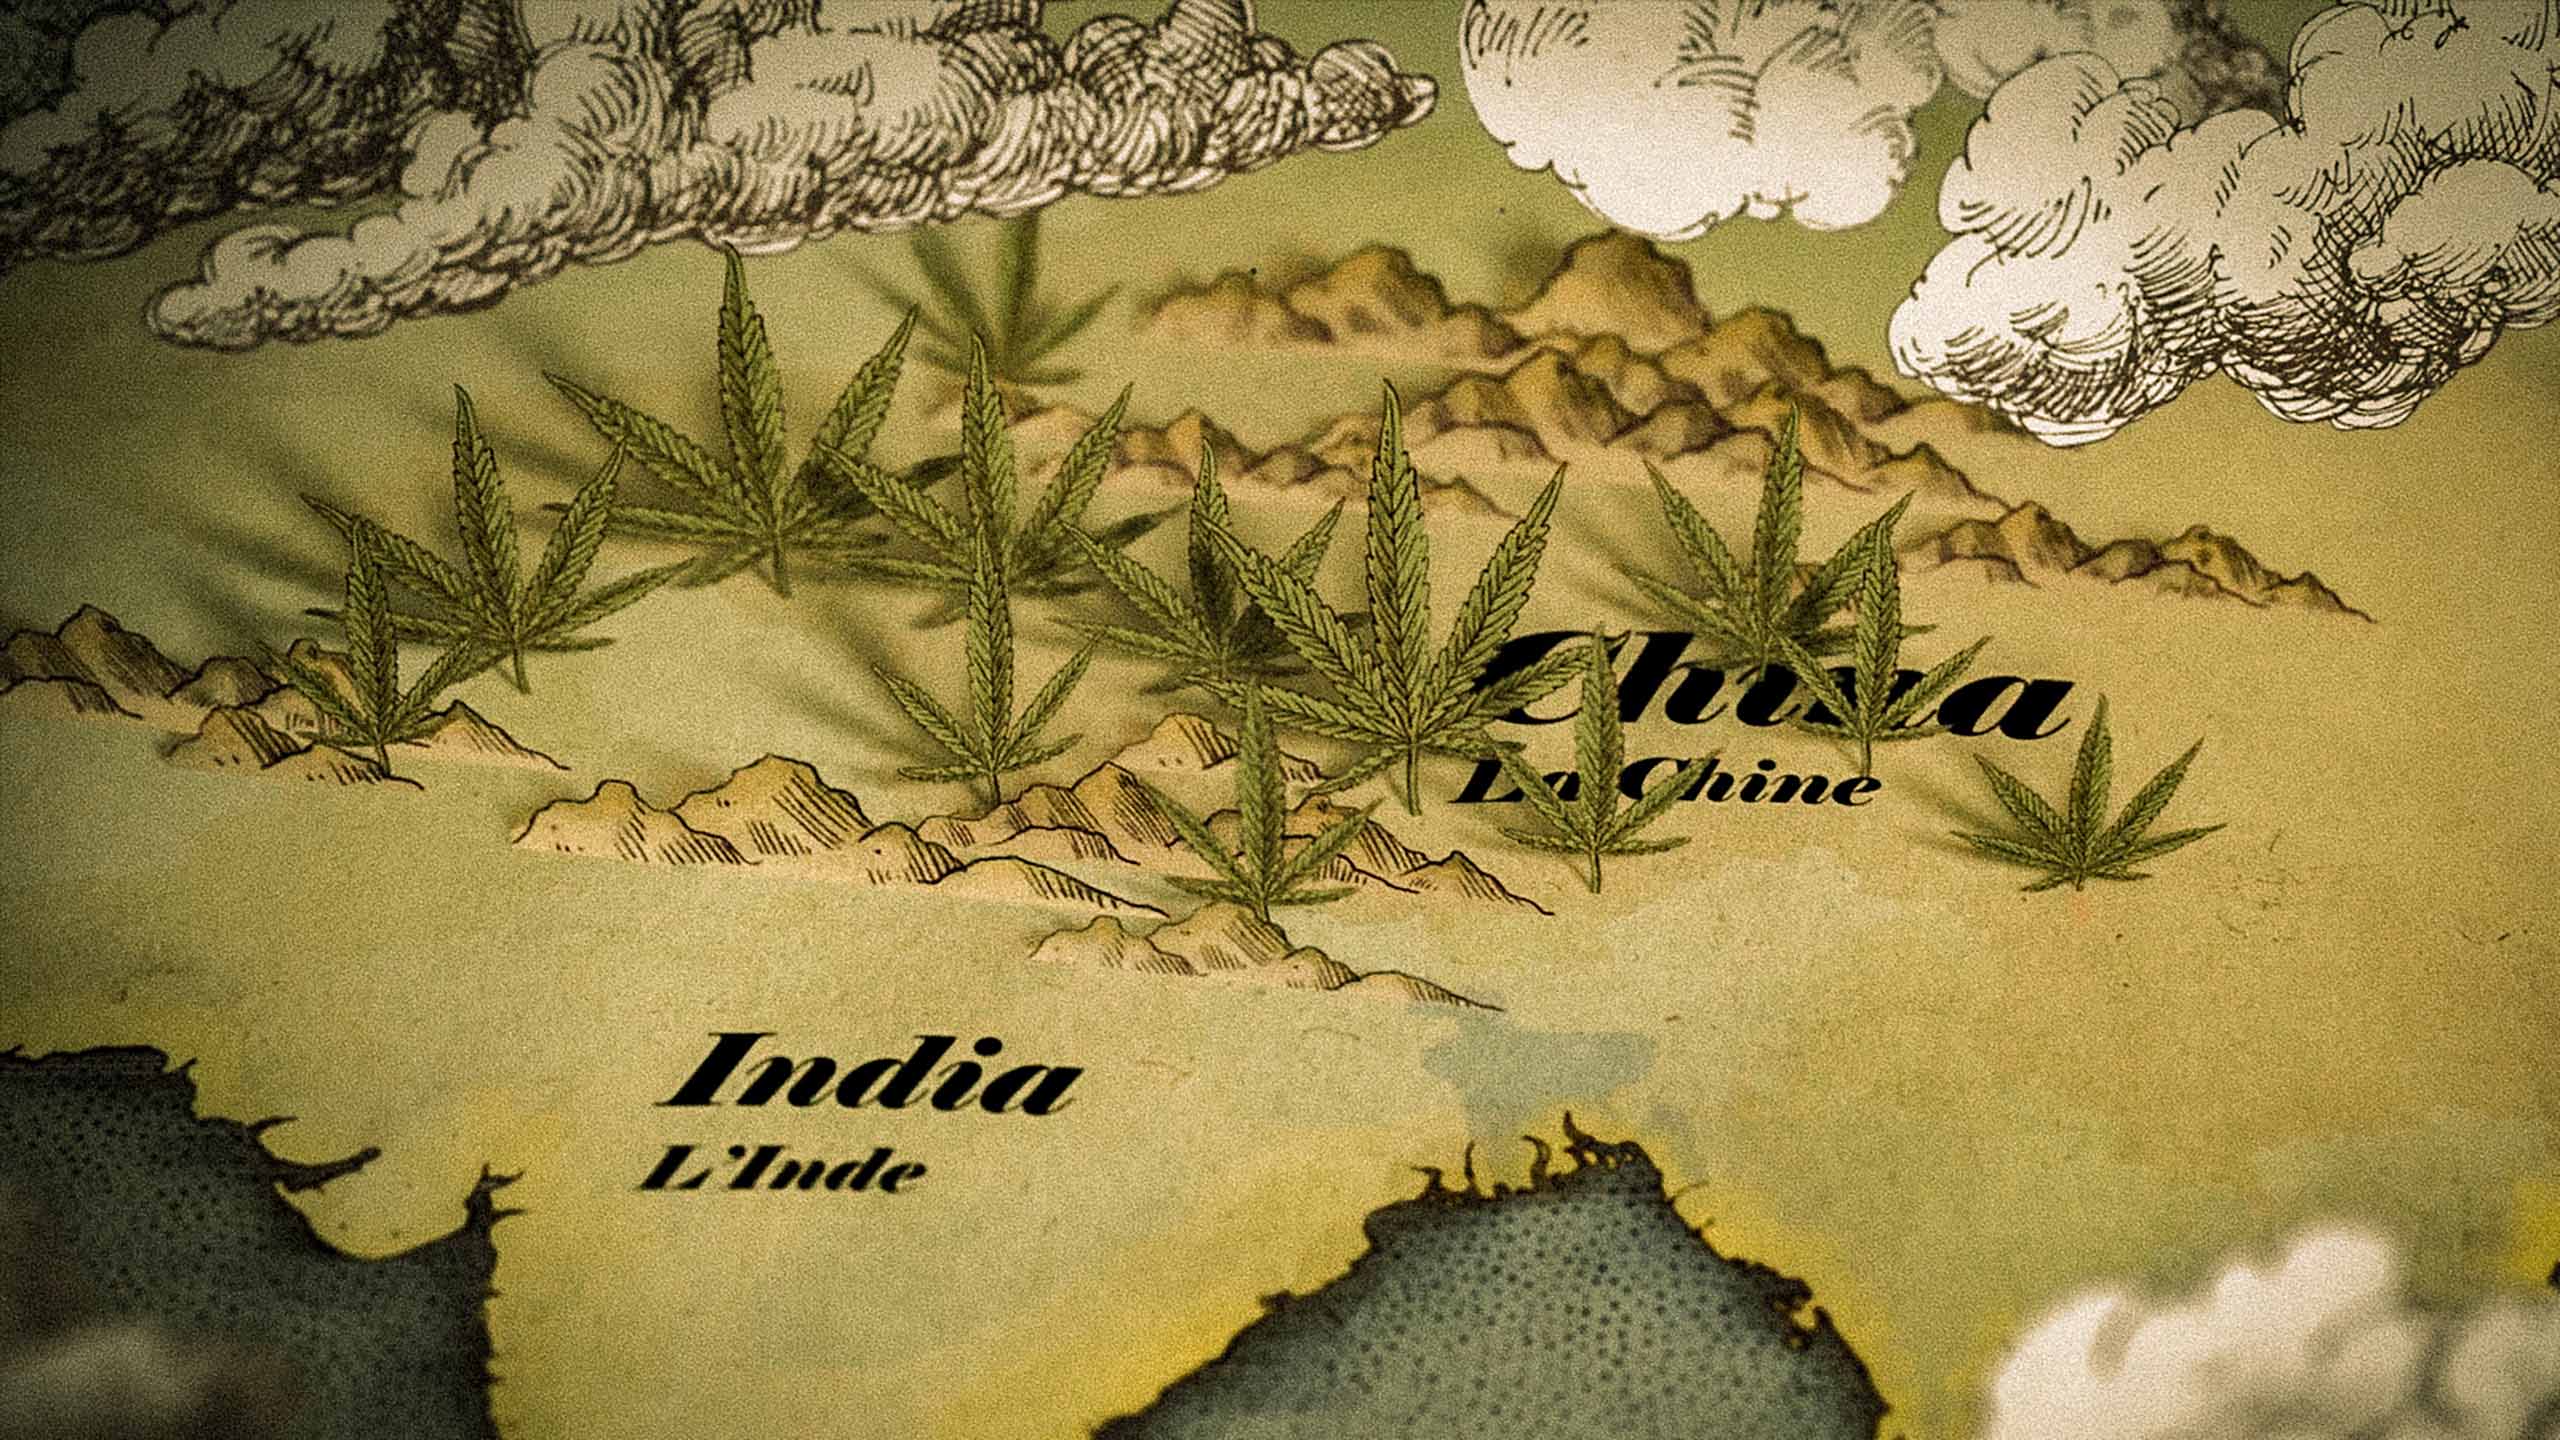 History of Cannabis: Part Two